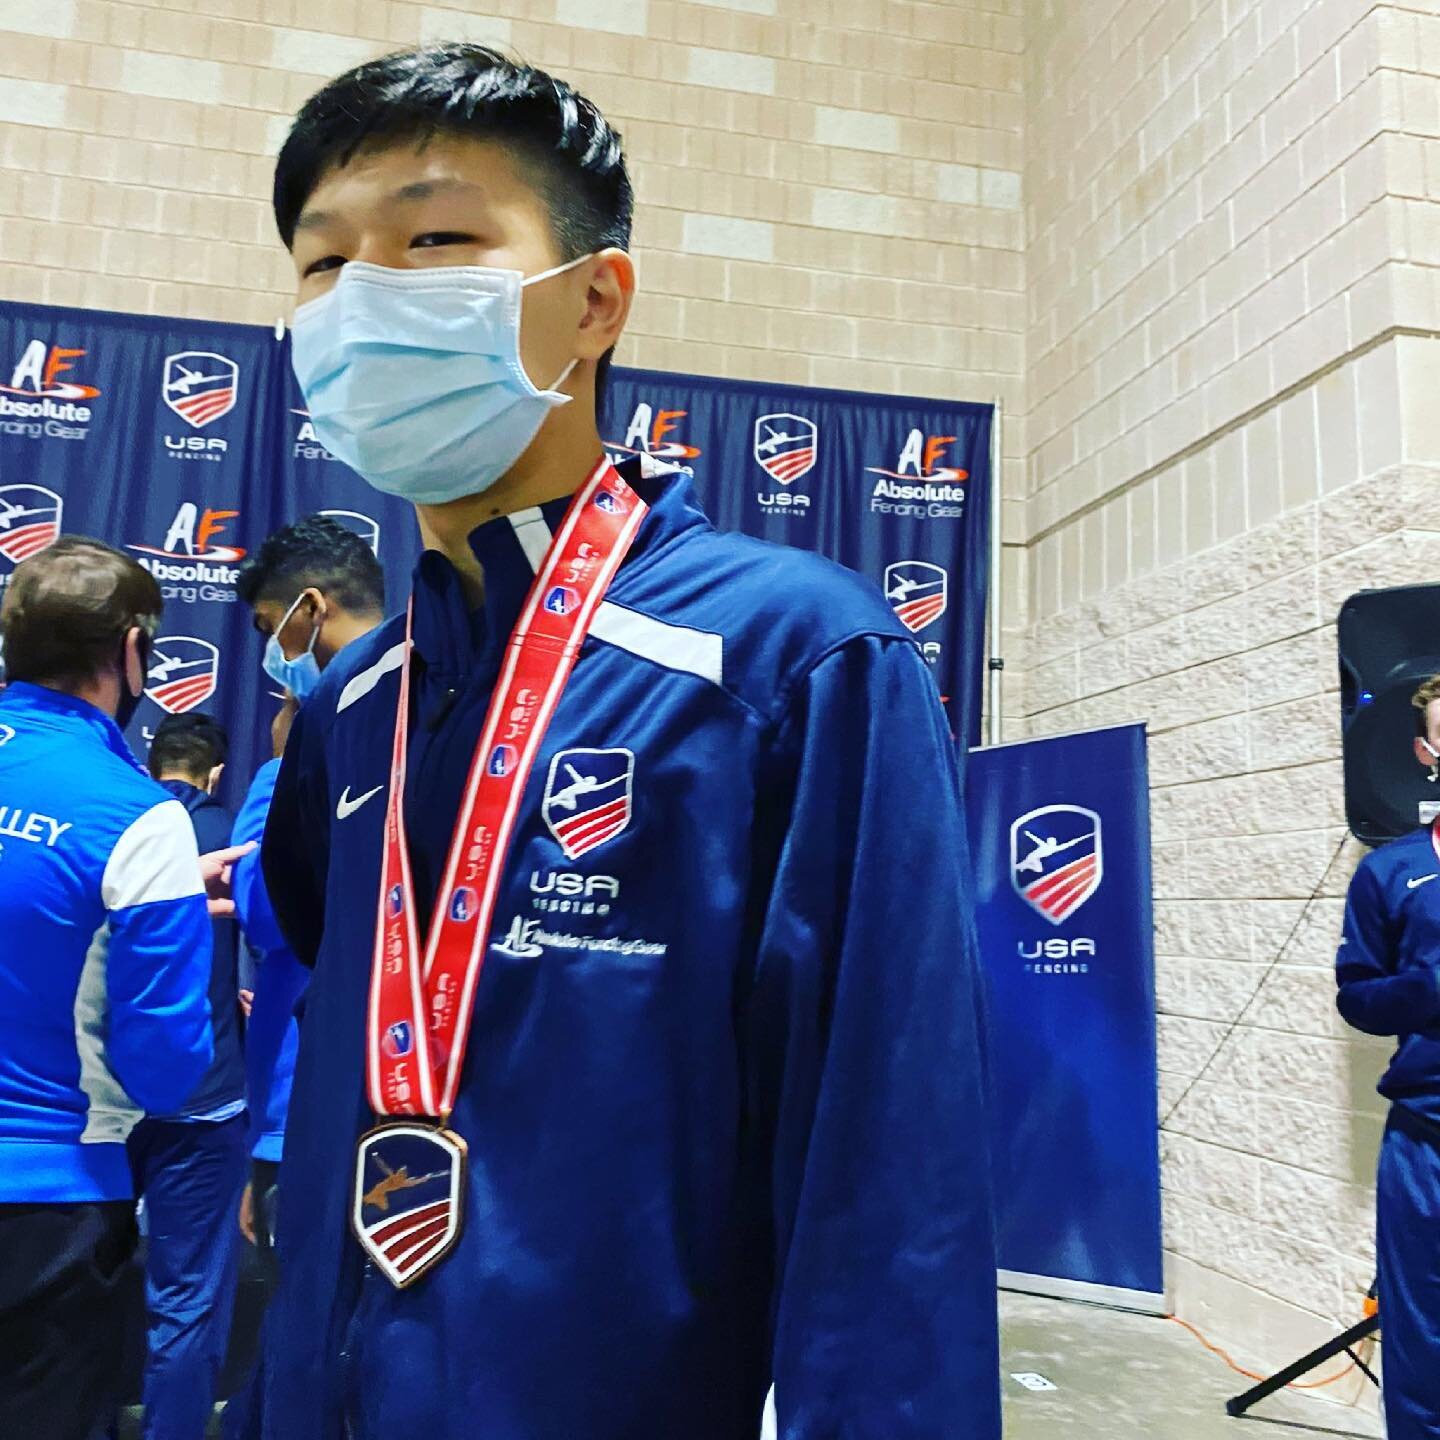 Brandon Li has an amazing 5th place finish in D1MF. Congratulations #marxfencingacademy#acenterforexcellence #usfencing